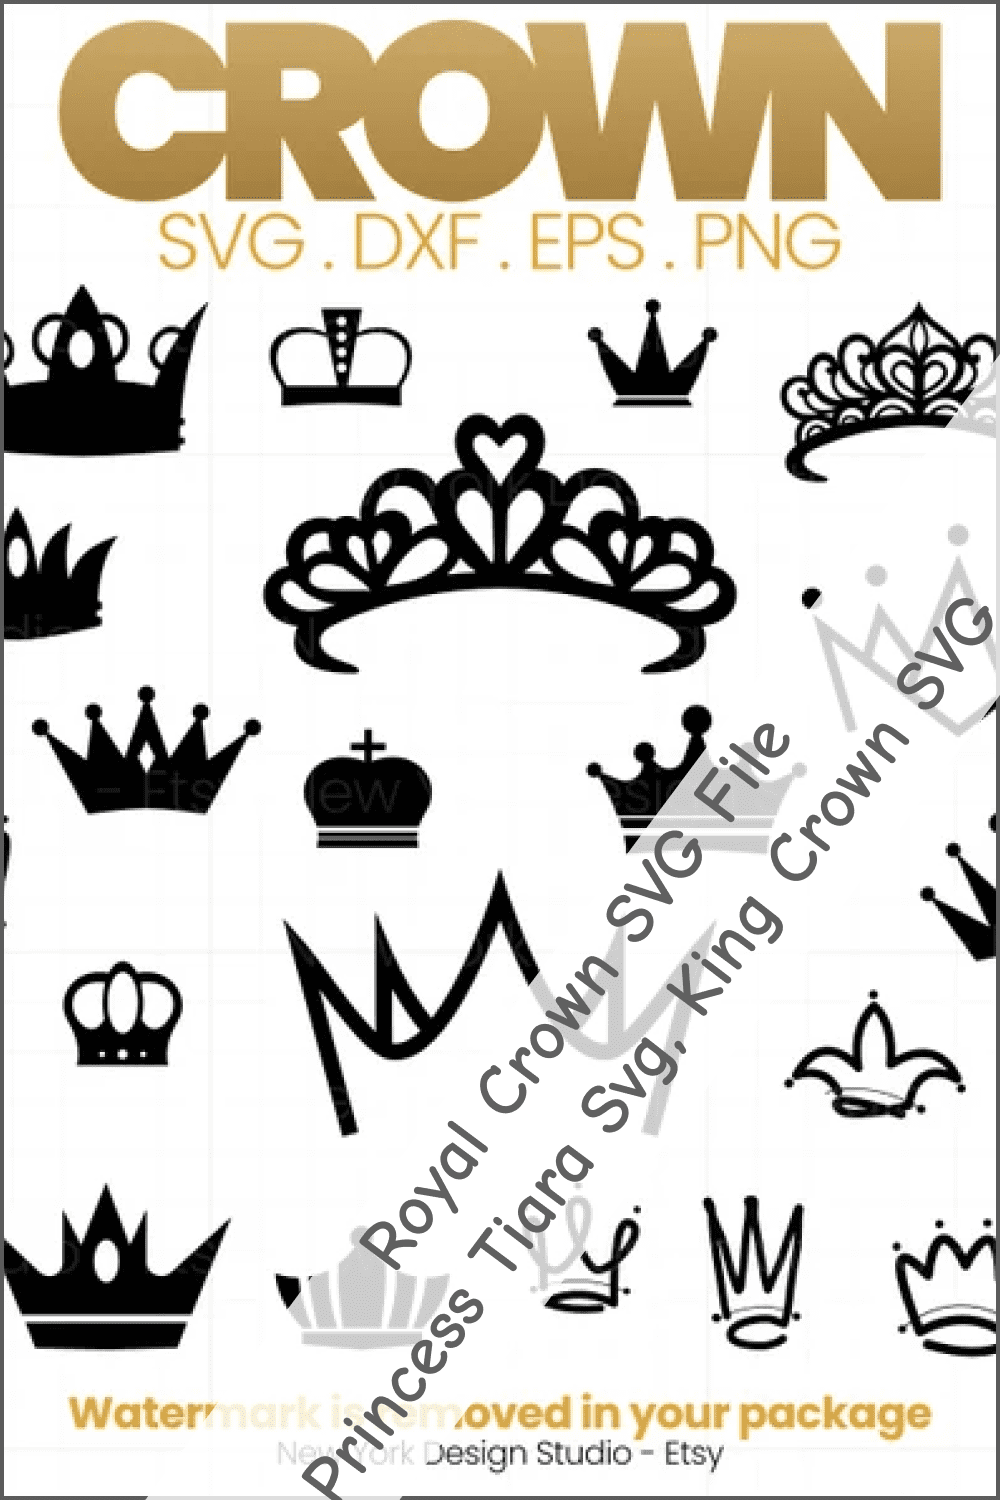 Elegant and cute crown collection.